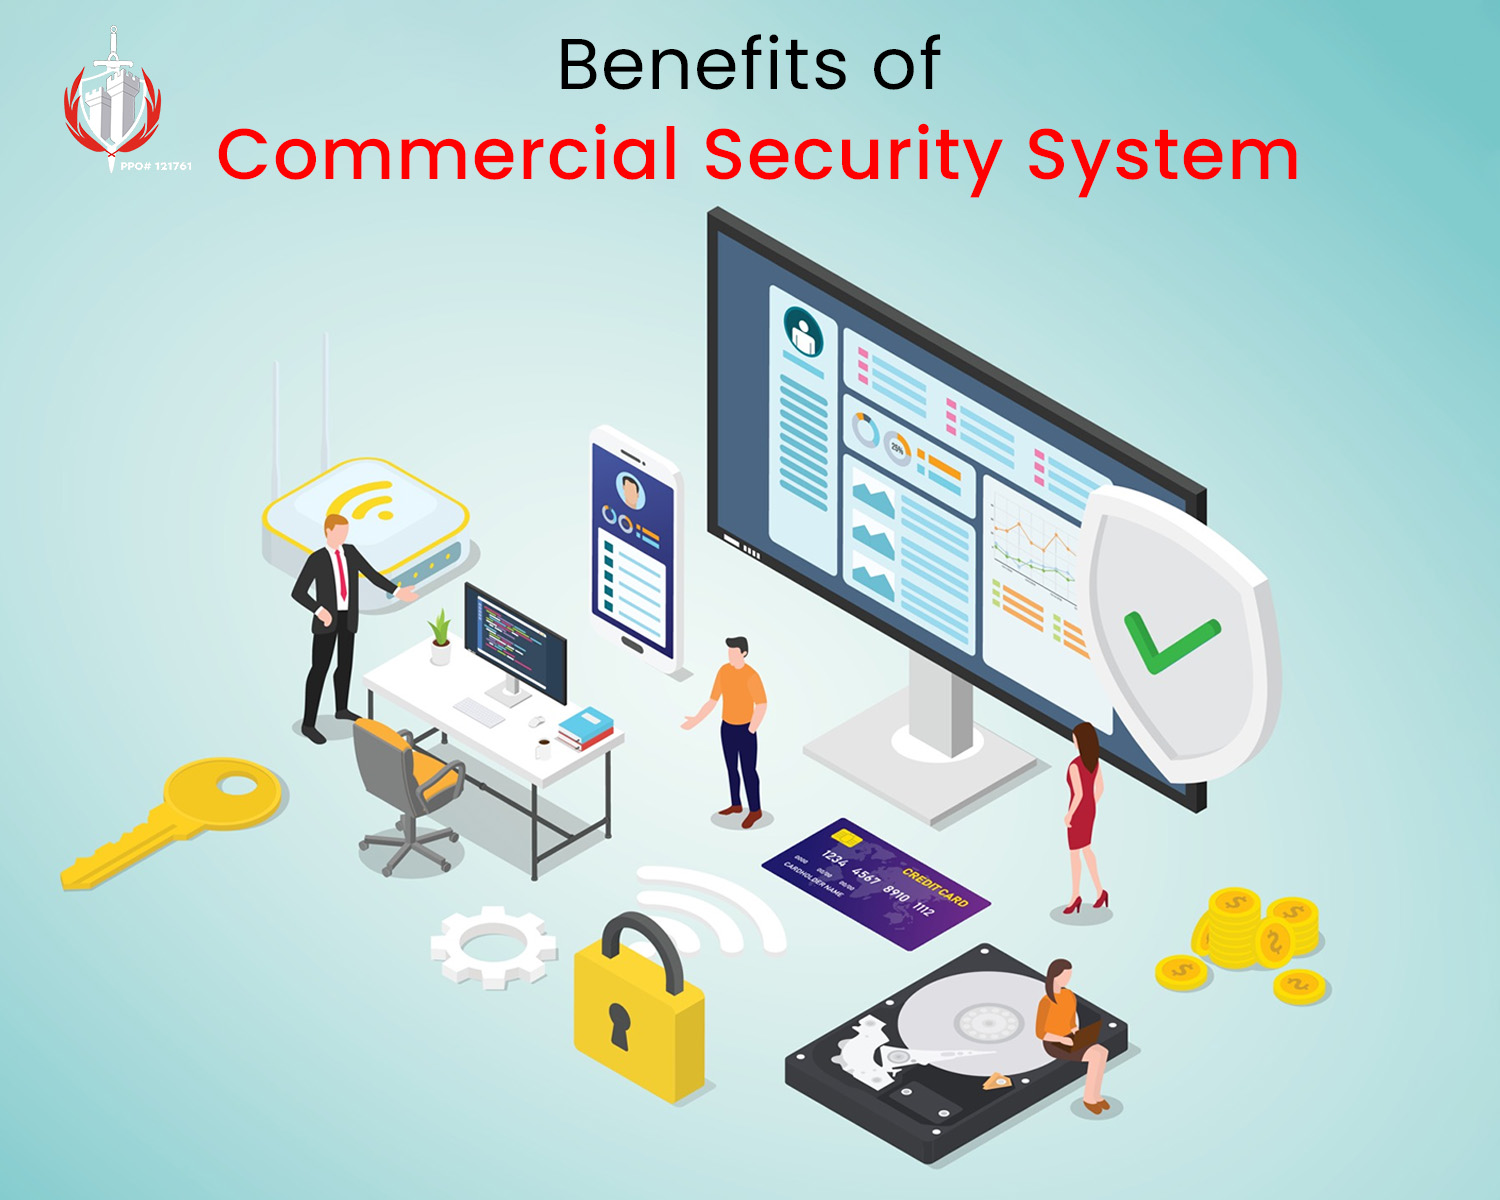 Benefits of Commercial Security System